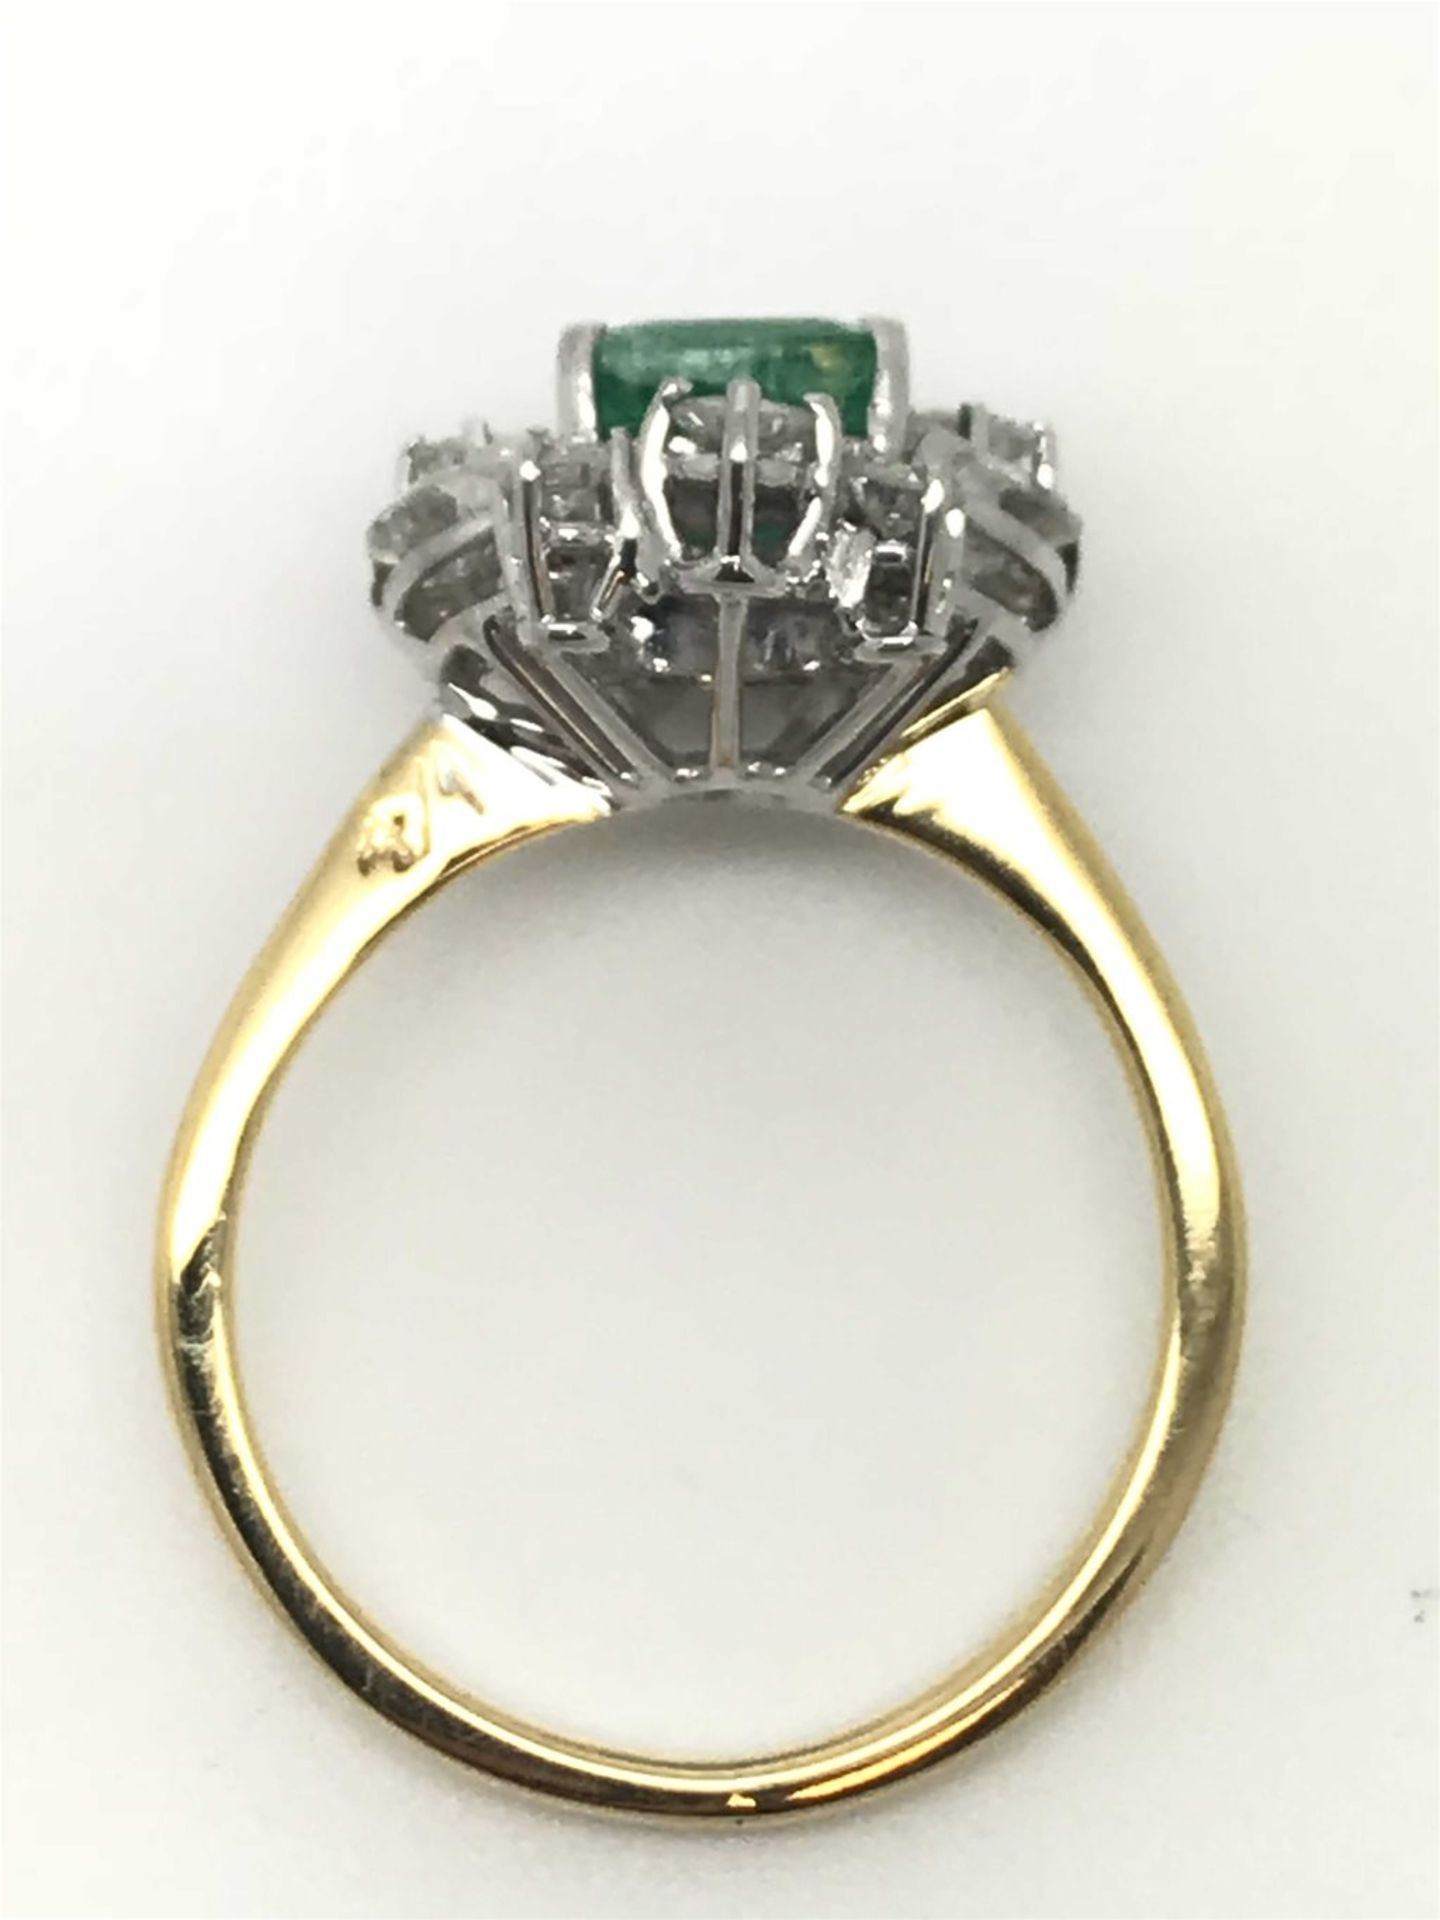 Emerald & Diamond (1.05ct) Cluster Ring, 18ct Yellow Gold - Image 4 of 5